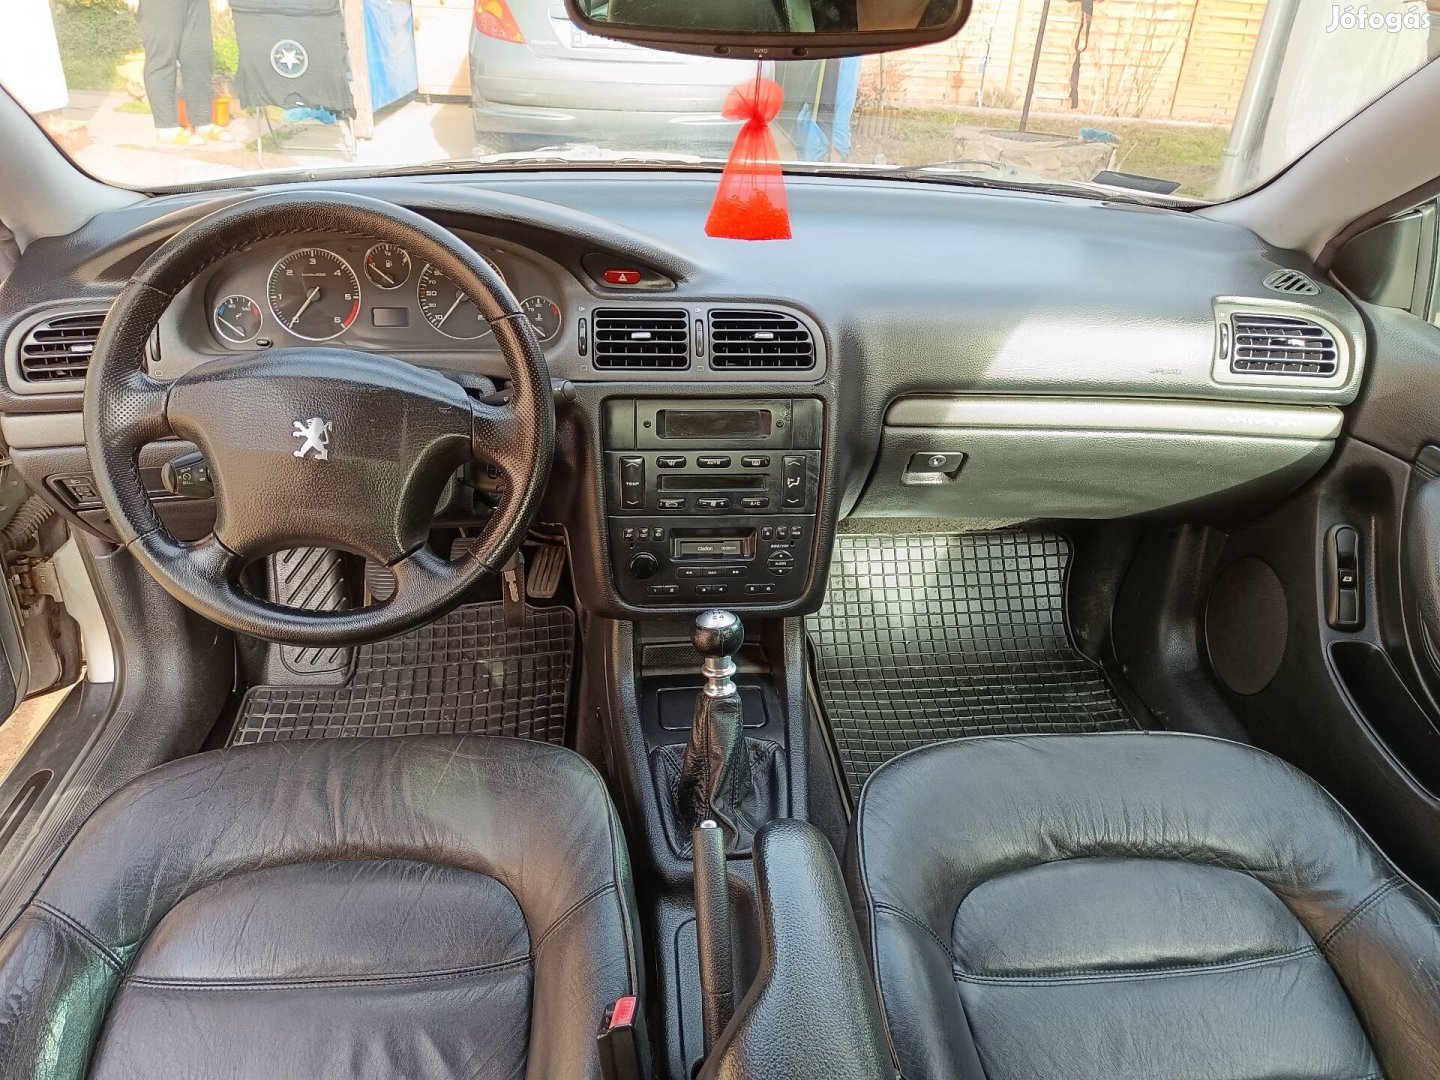 Peugeot 406 coupe 2.2 hdi